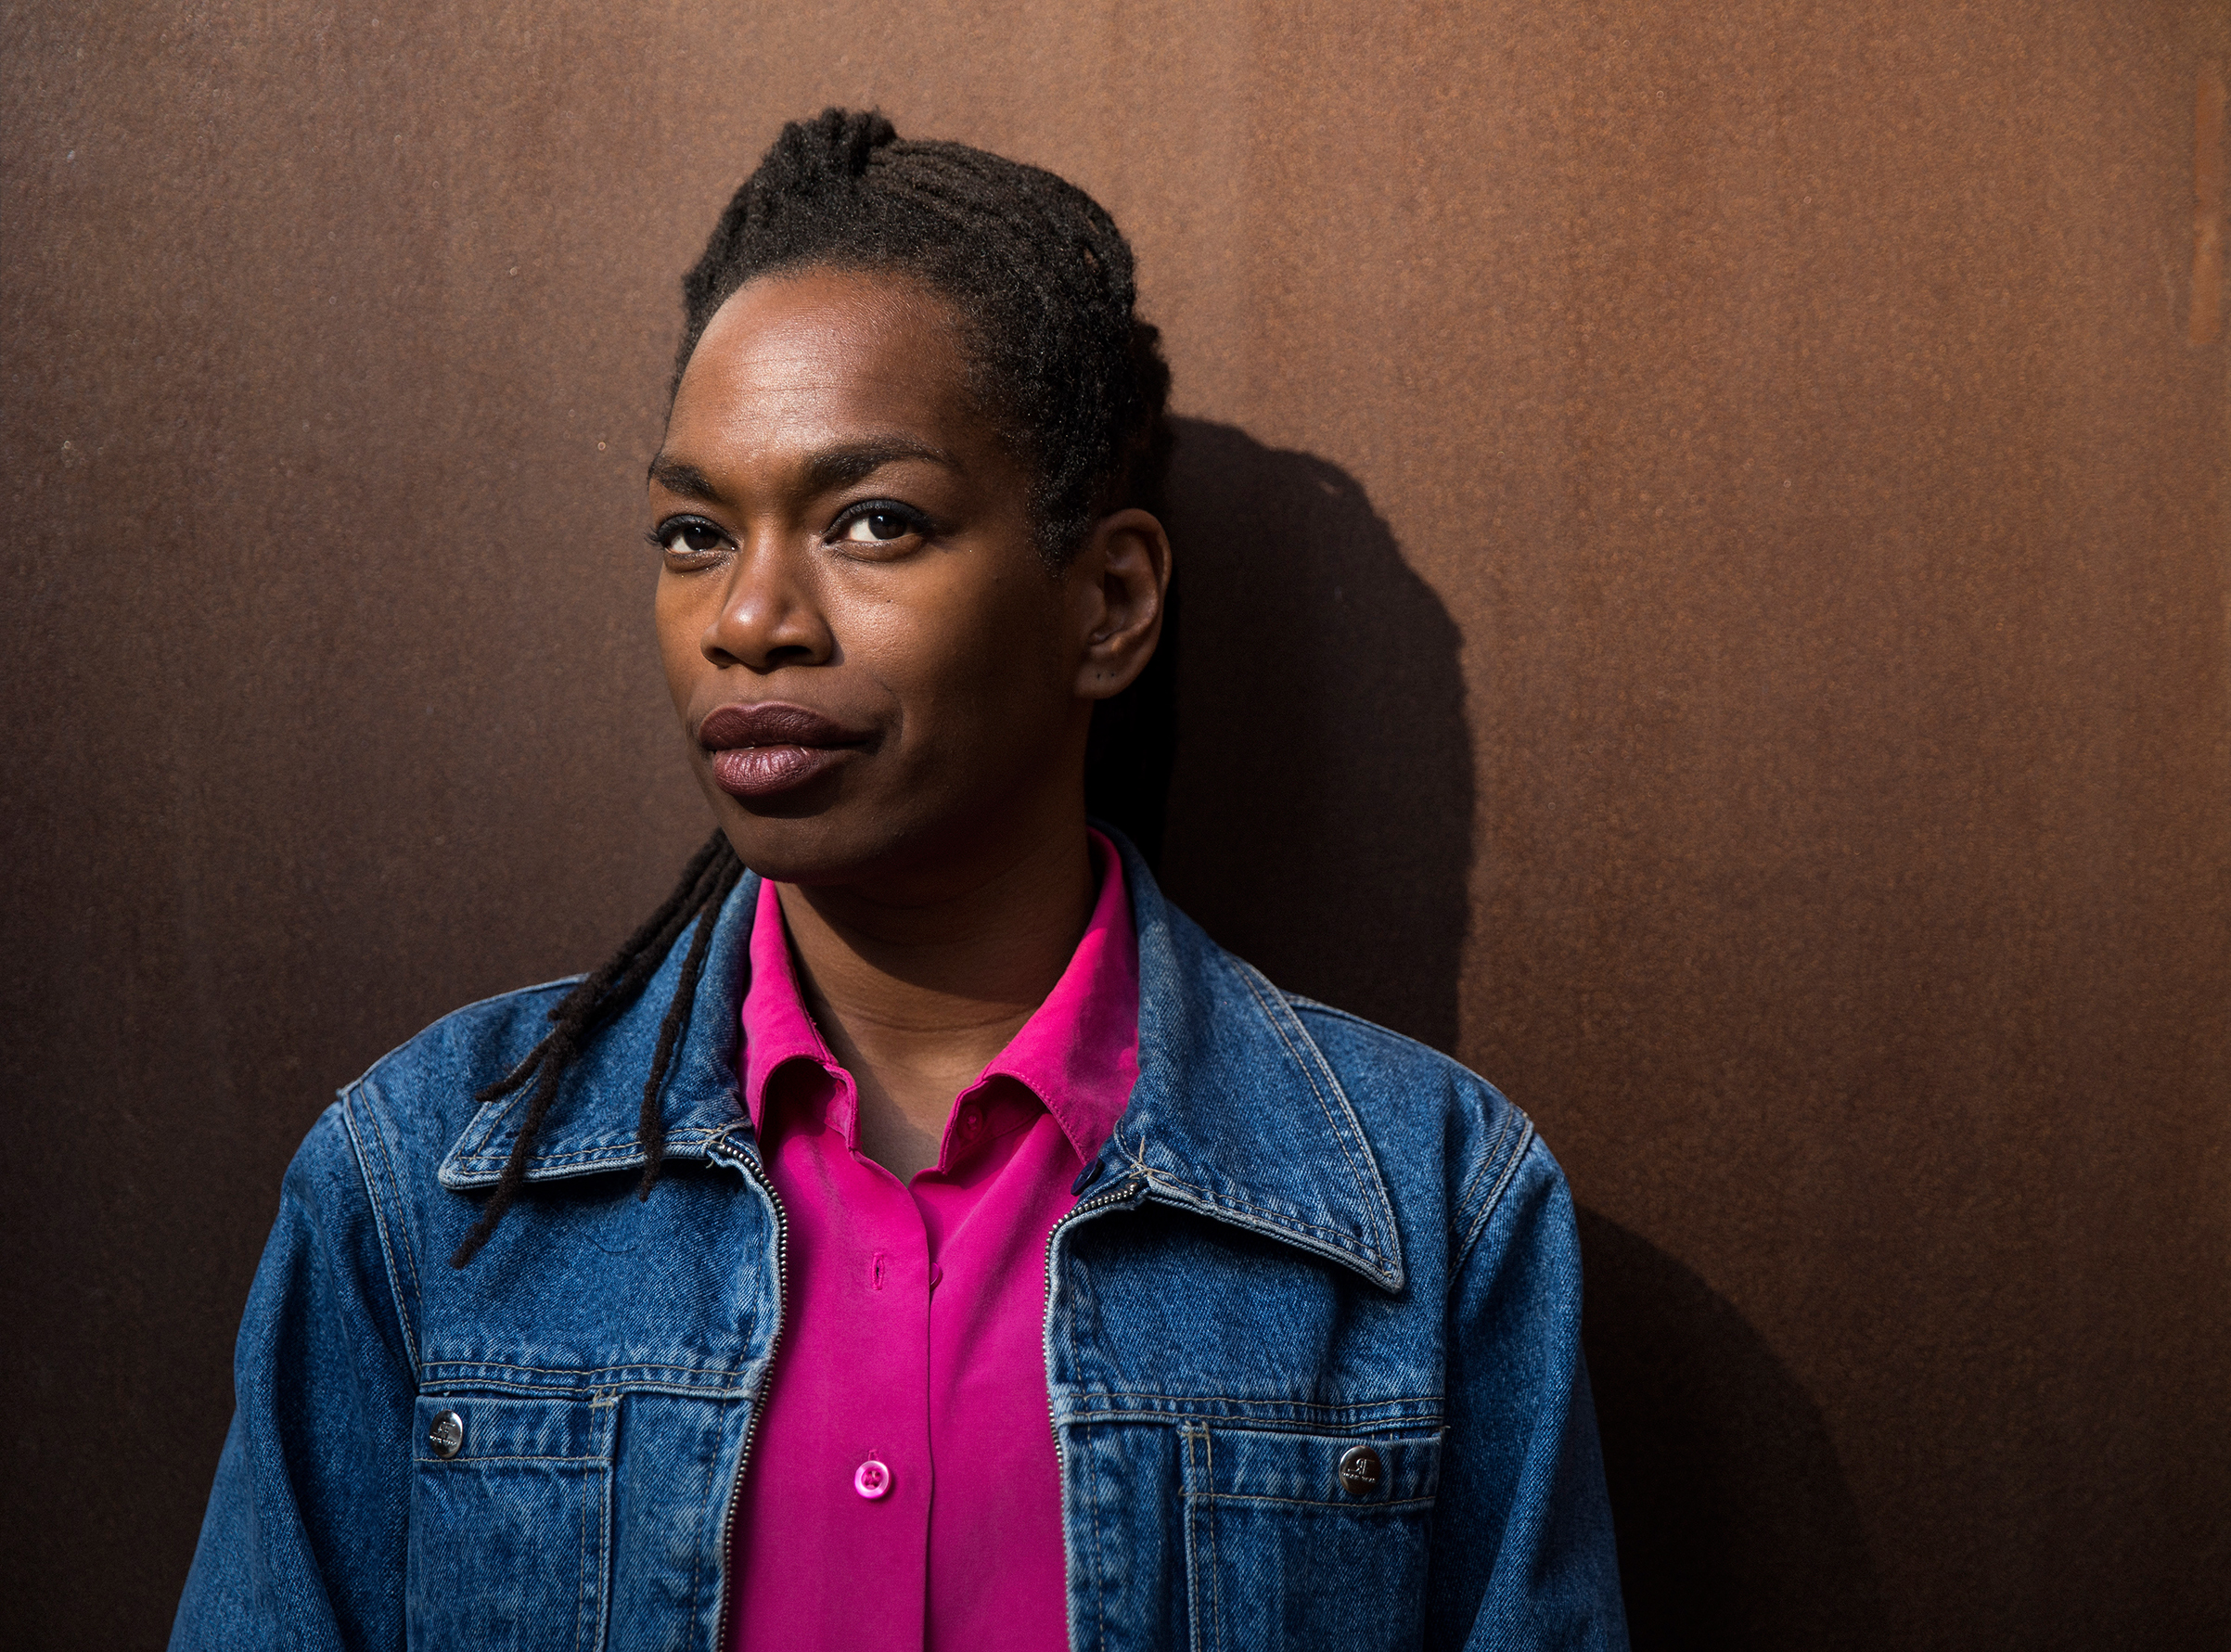 Michelle Jones, a Ph.D. candidate at New York University who was released from prison in August, in New York, Sept. 11, 2017. (Damon Winter—The New York Times/Redux)